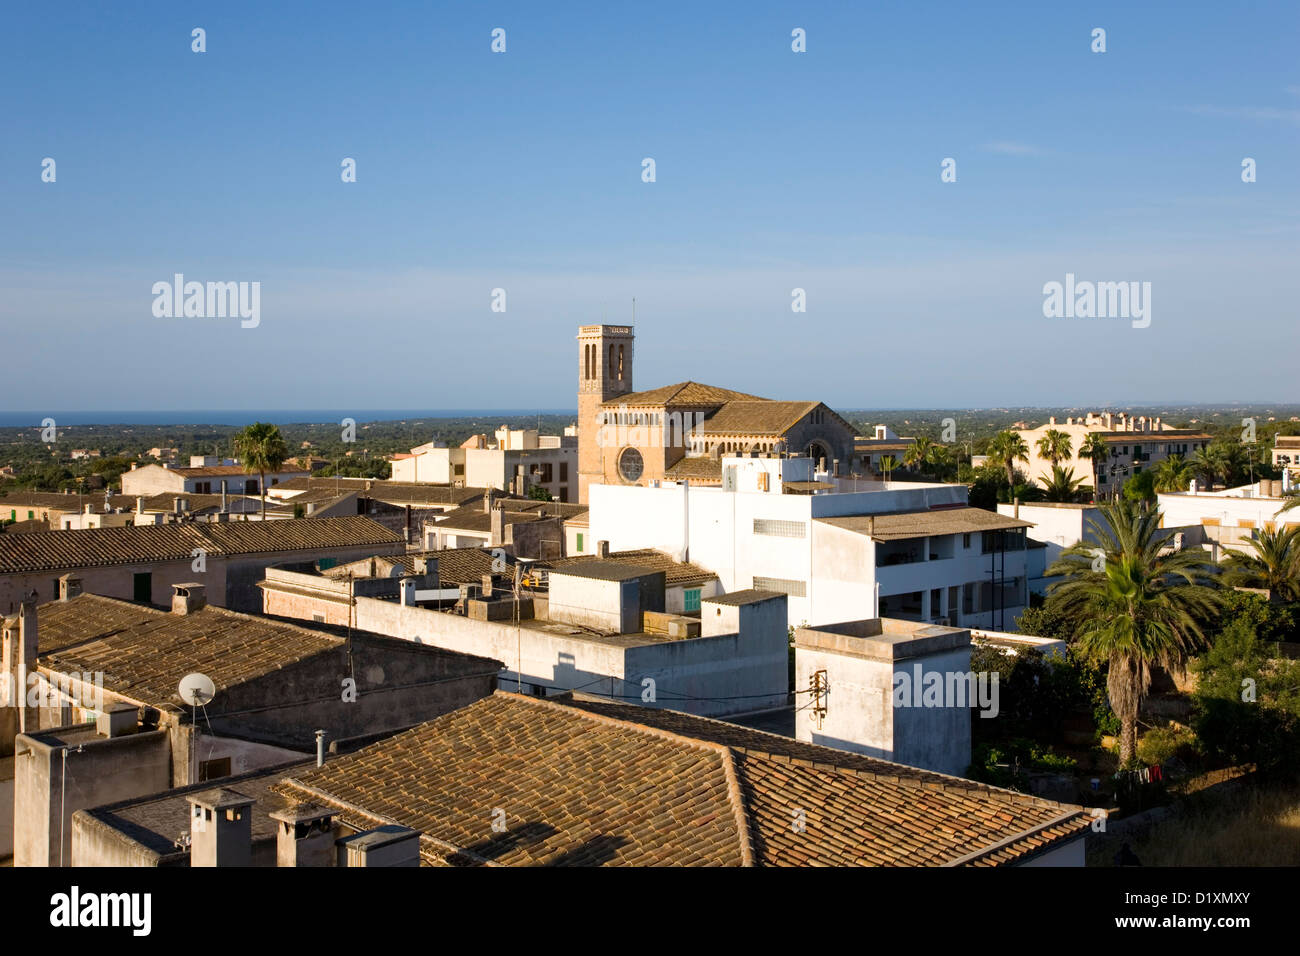 Calonge, Mallorca, Balearic Islands, Spain. View across rooftops to the village church. Stock Photo